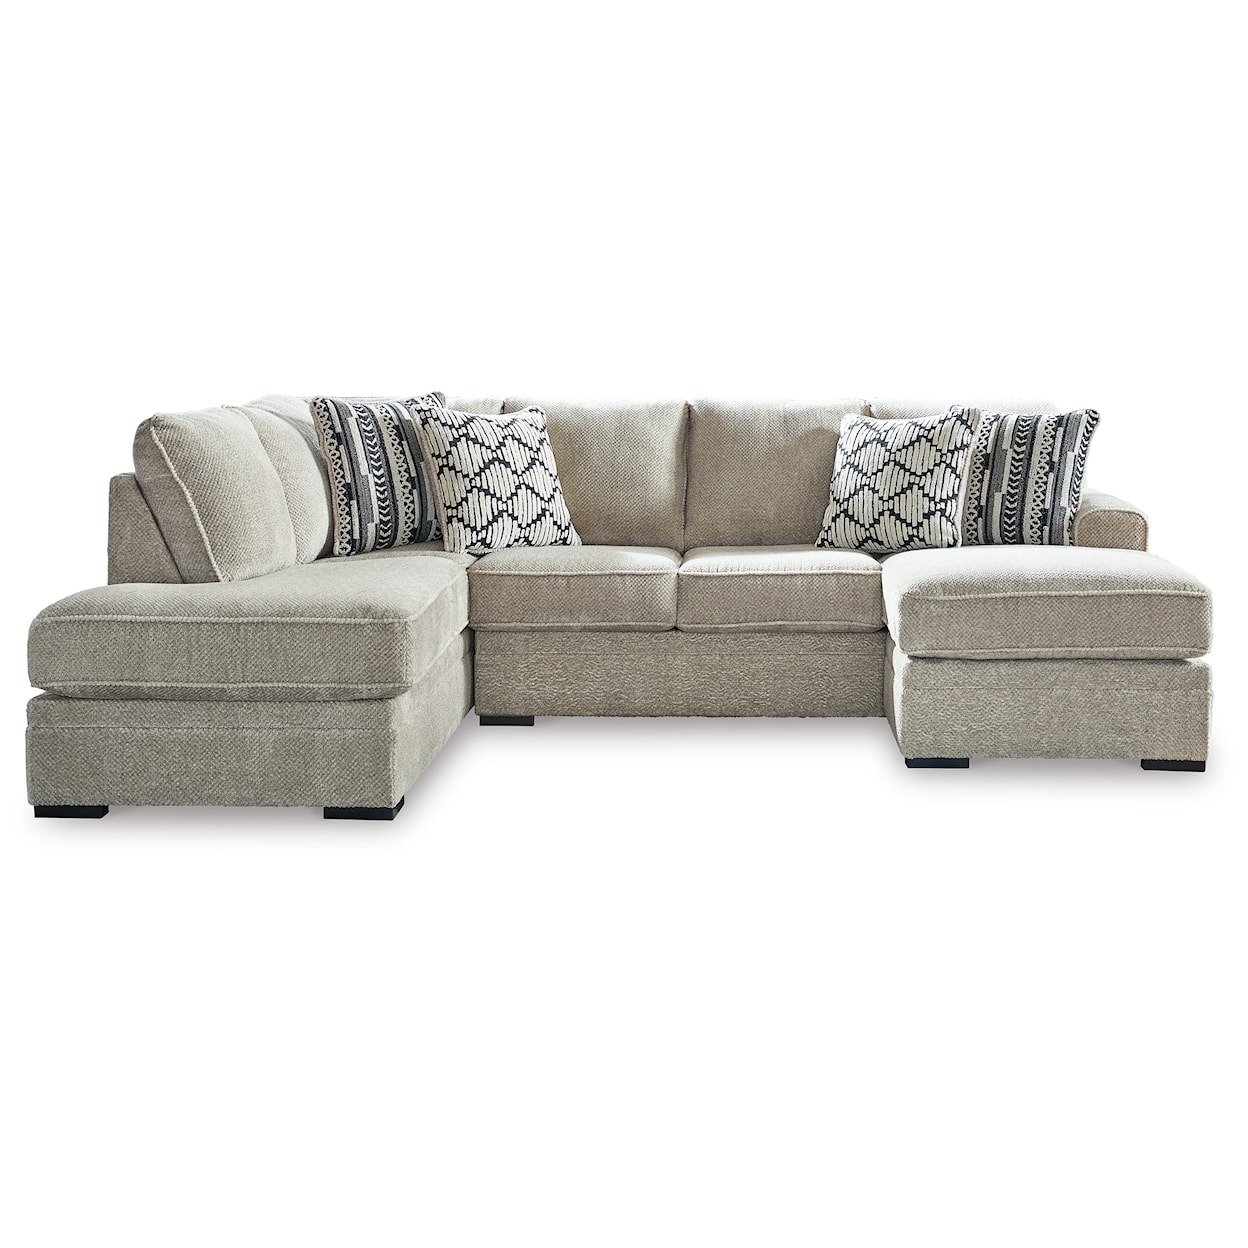 JB King Calnita Sectional with 2 Chaises